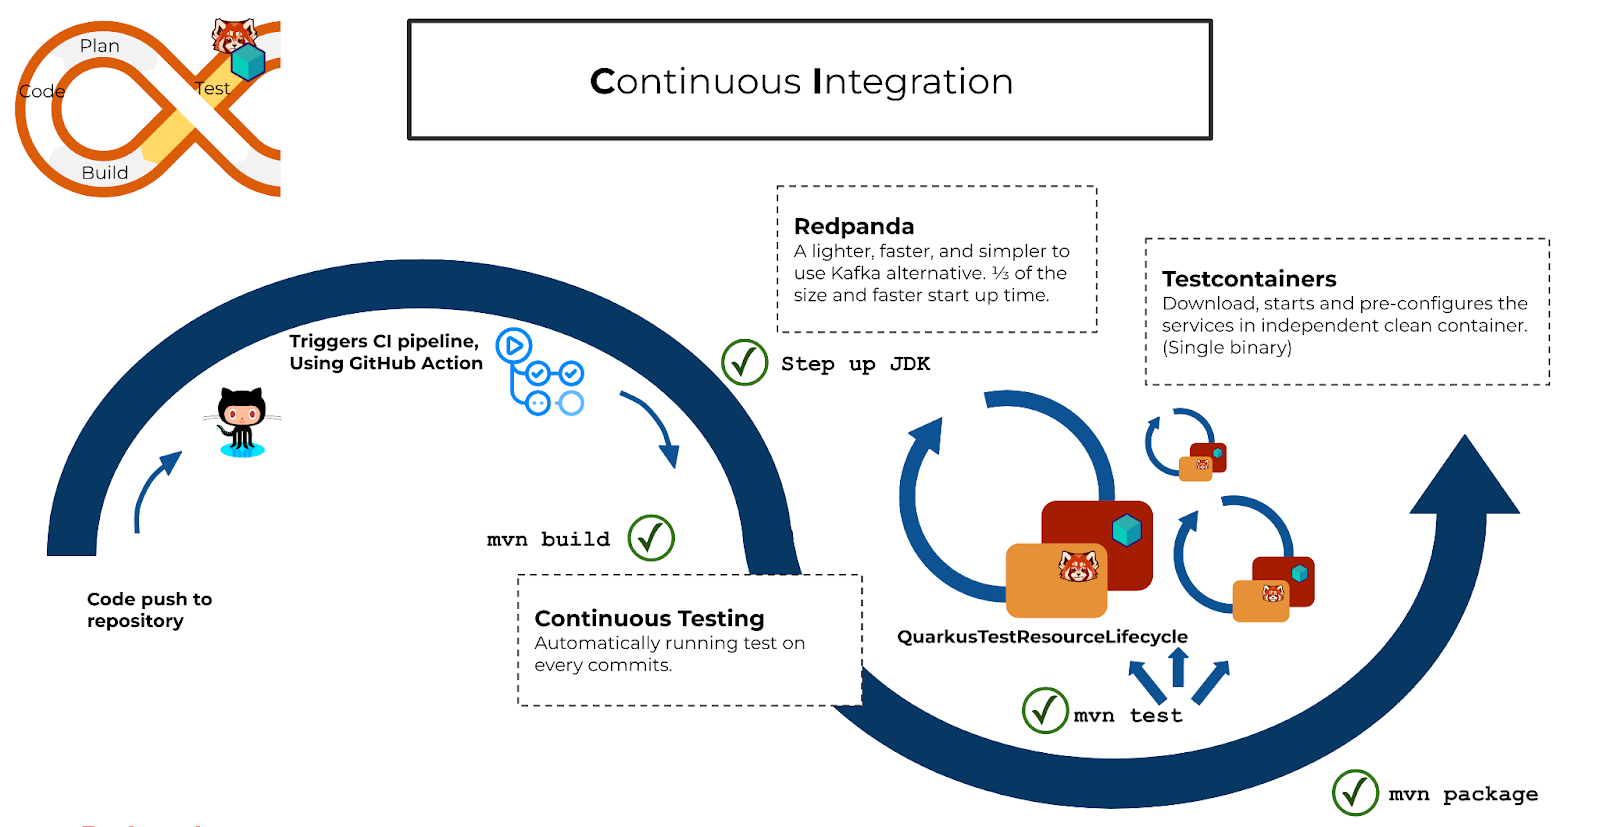 How continuous integration works with Redpanda and Testcontainers